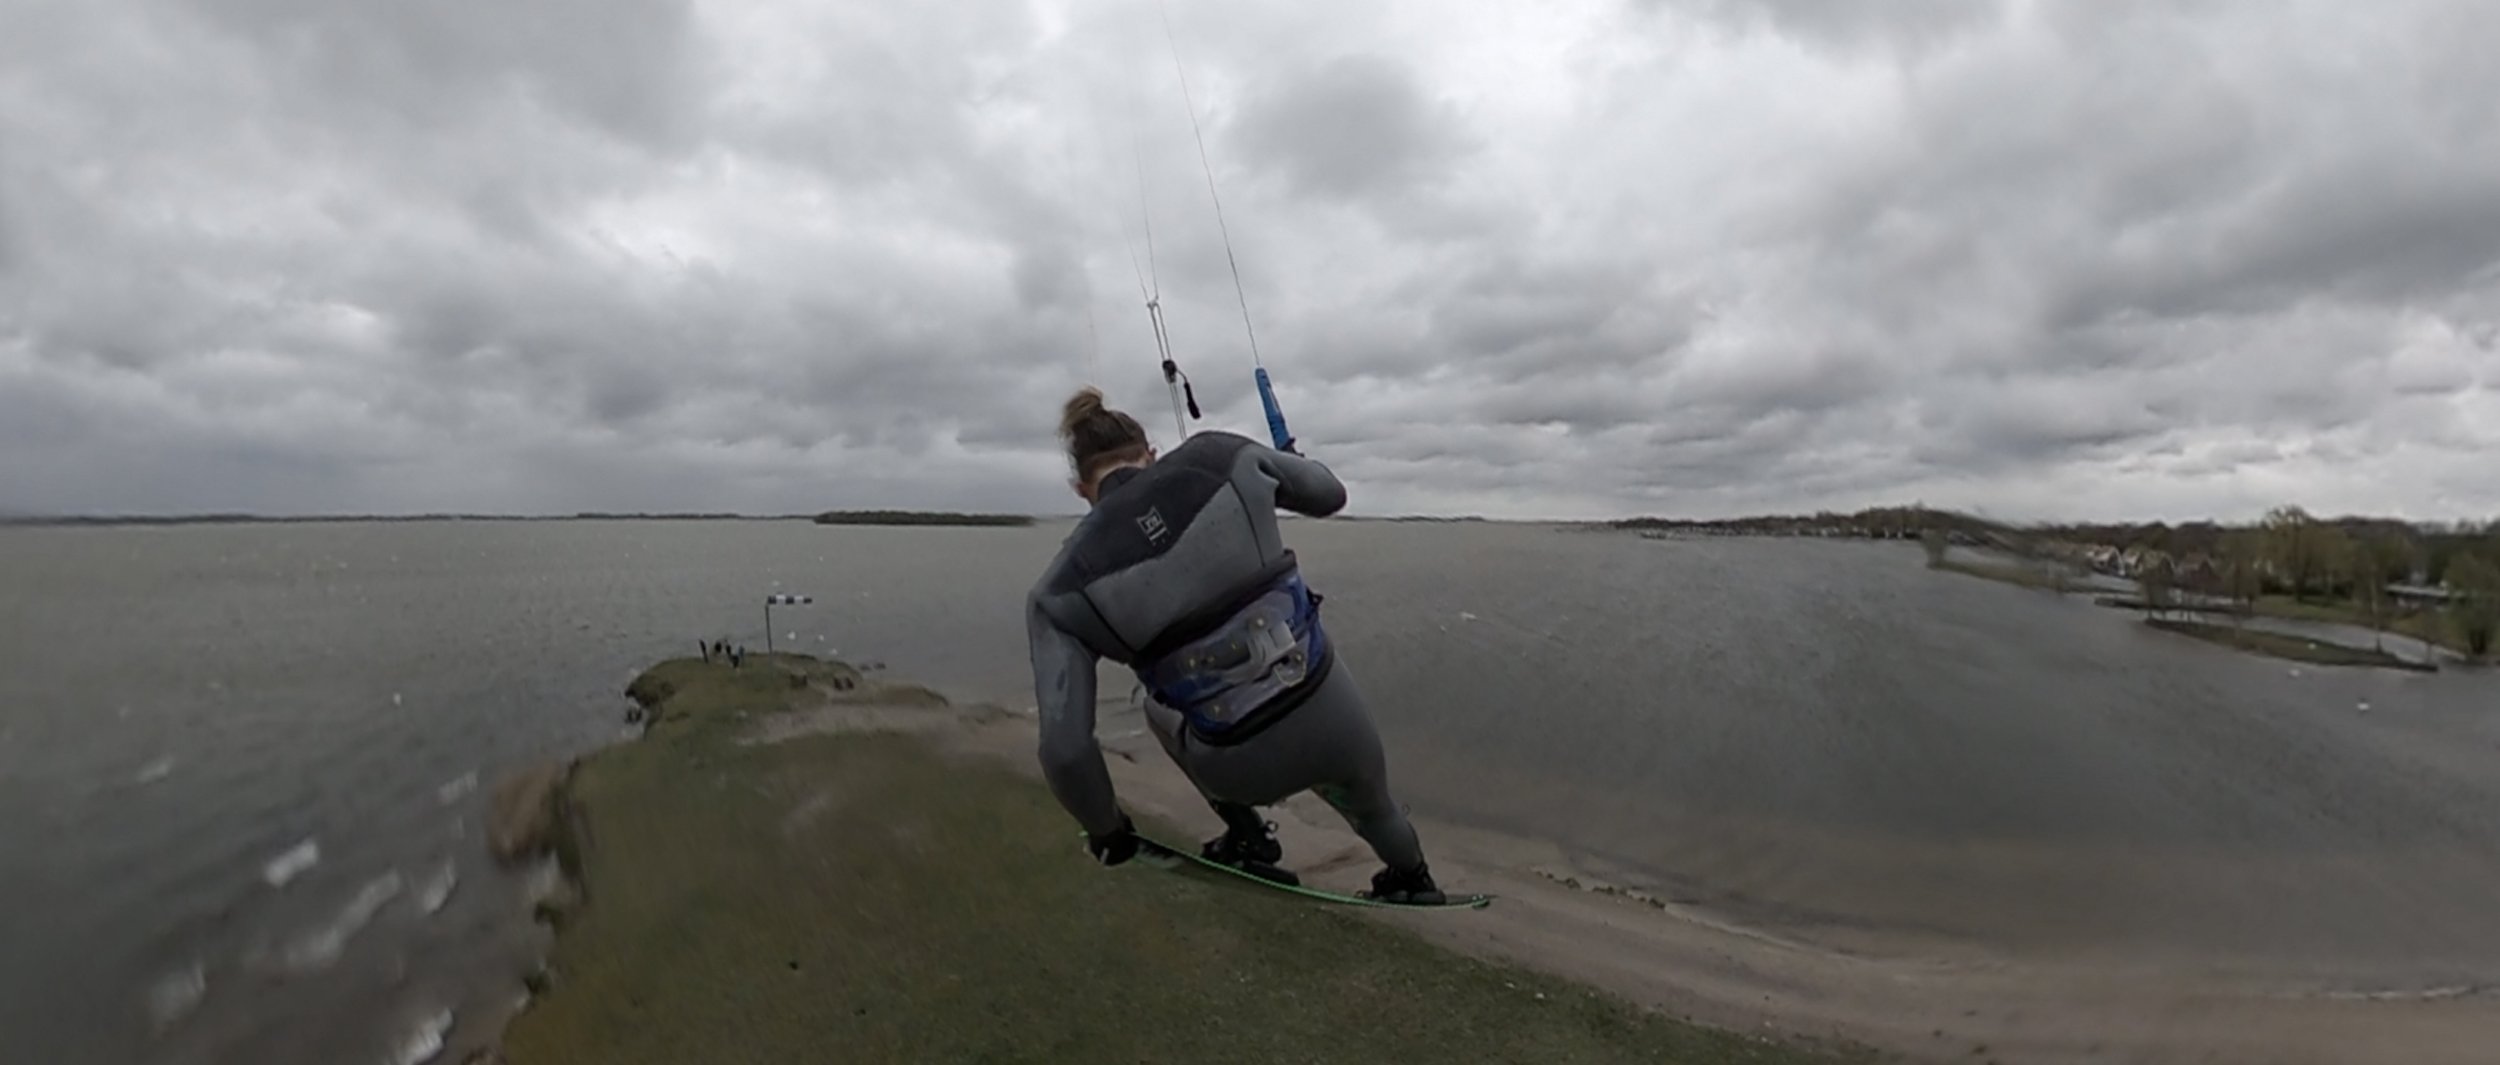 The Good, the Bad and the Ugly - Kiteboarding in Holland.00_02_14_10.Still012.jpg